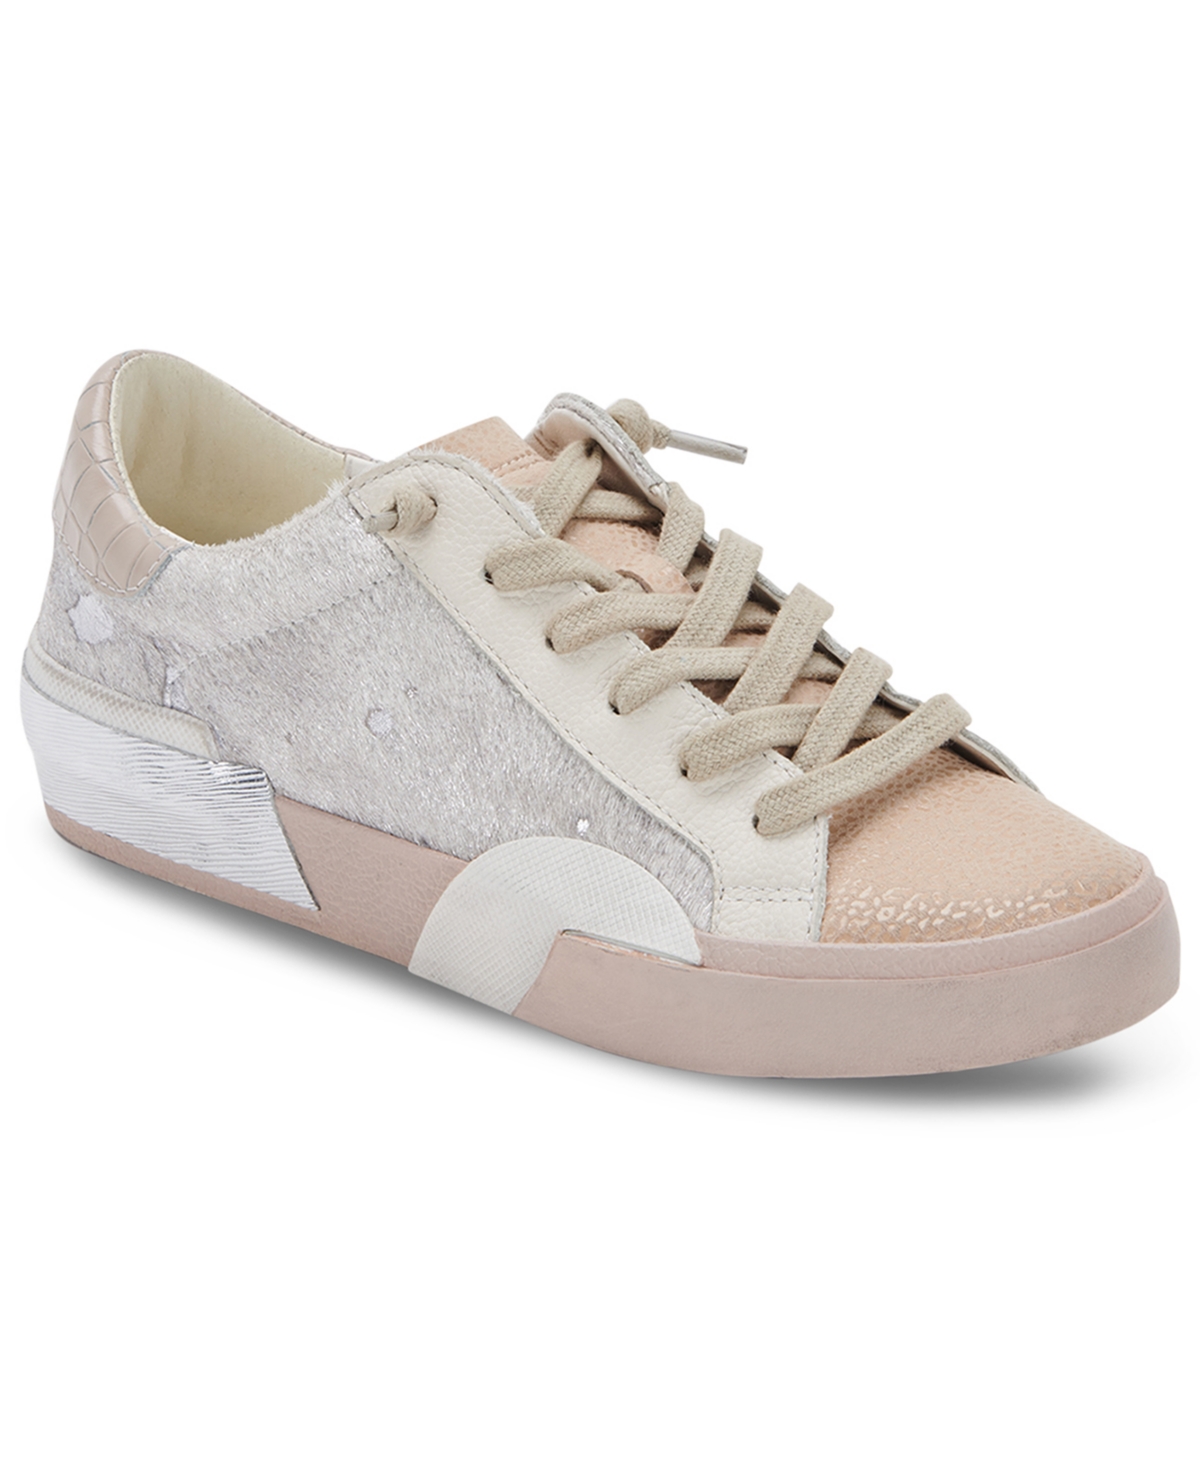 DOLCE VITA ZINA LACE-UP SNEAKERS WOMEN'S SHOES